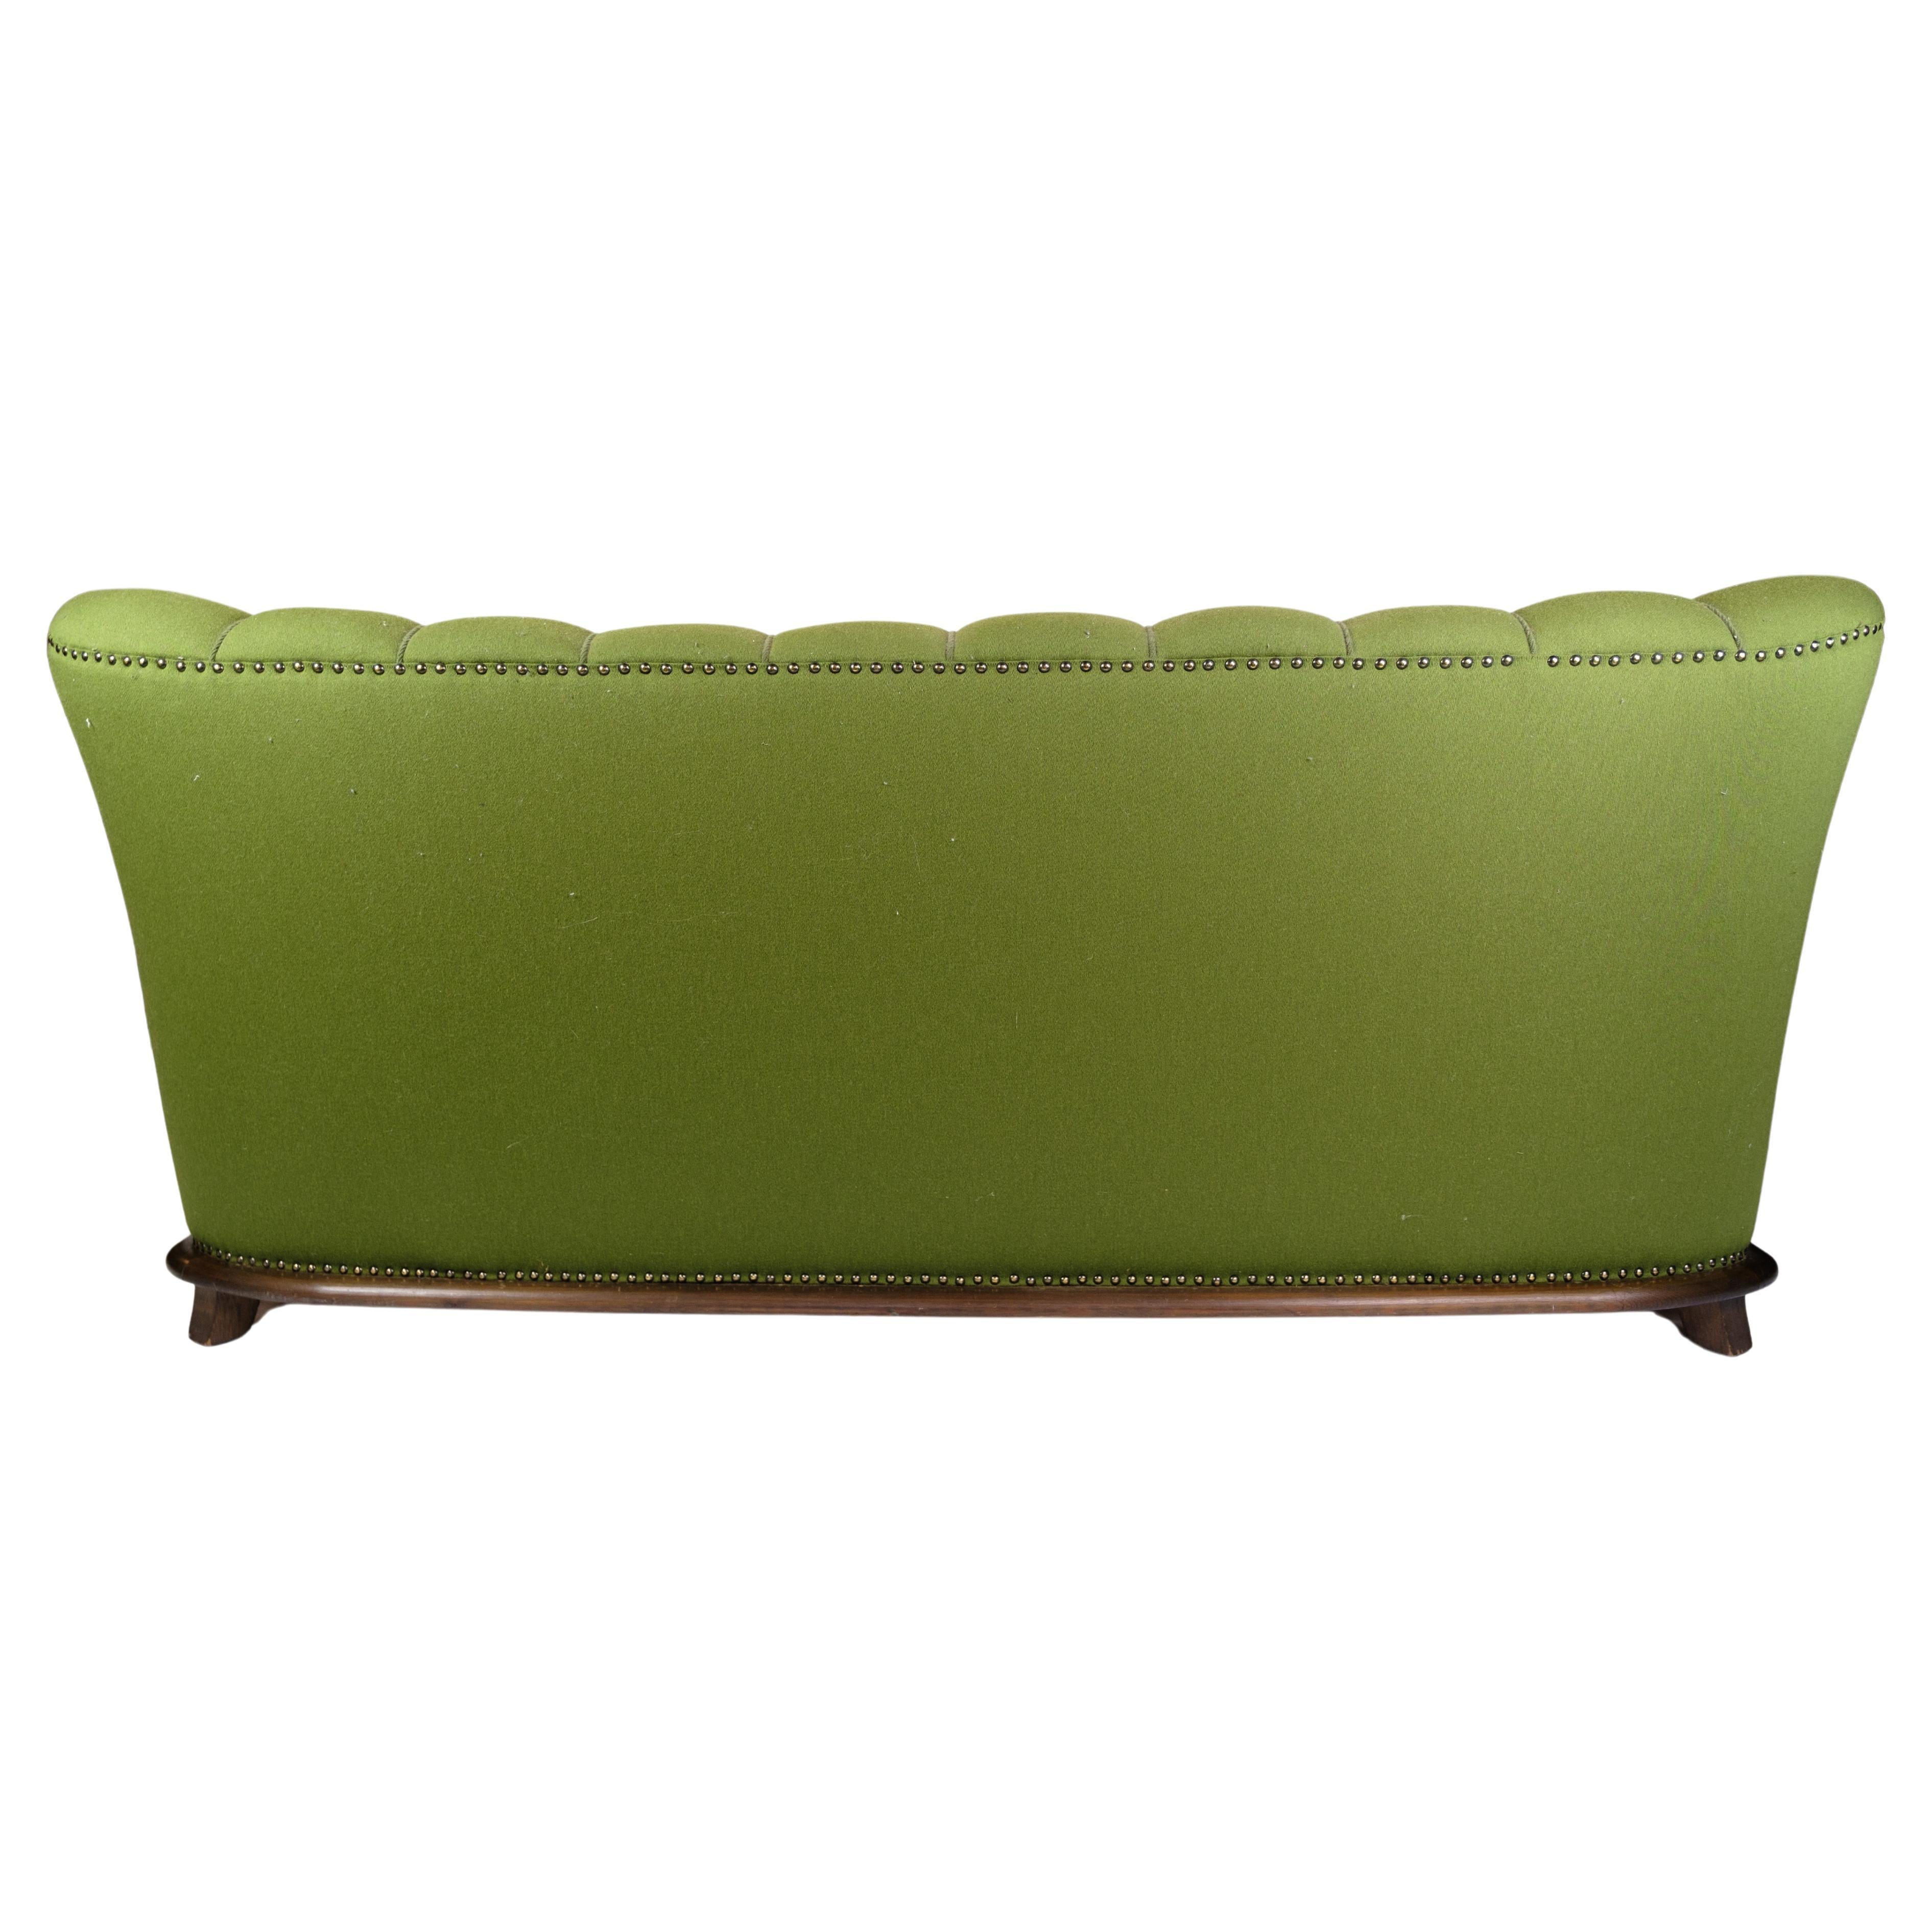 Sofa in Green fabric with Wood Carvings from 1920s. 3